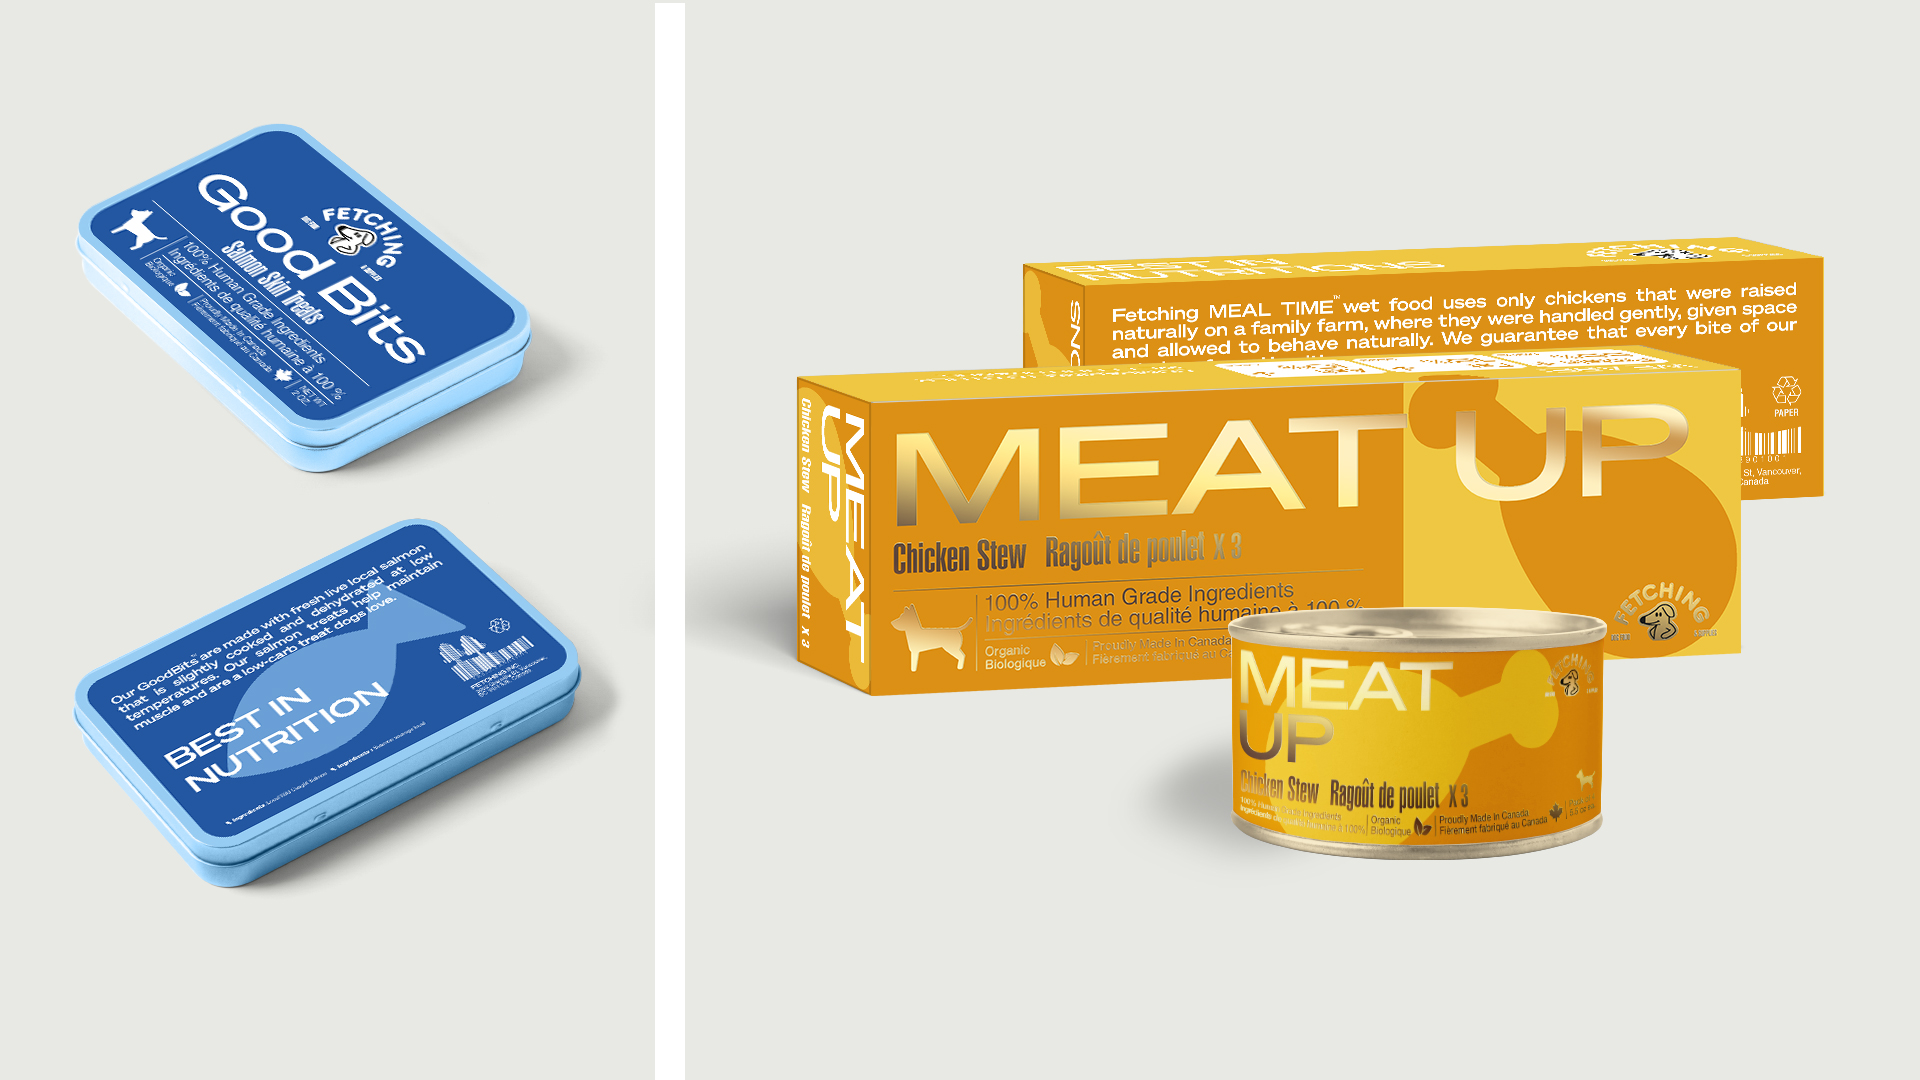 The left side of the image shows front and back views of the packaging for “Good Bits” salmon treats. The right side shows front and back views of the packaging for the premium wet food “Meat Up” as well as one of the cans.